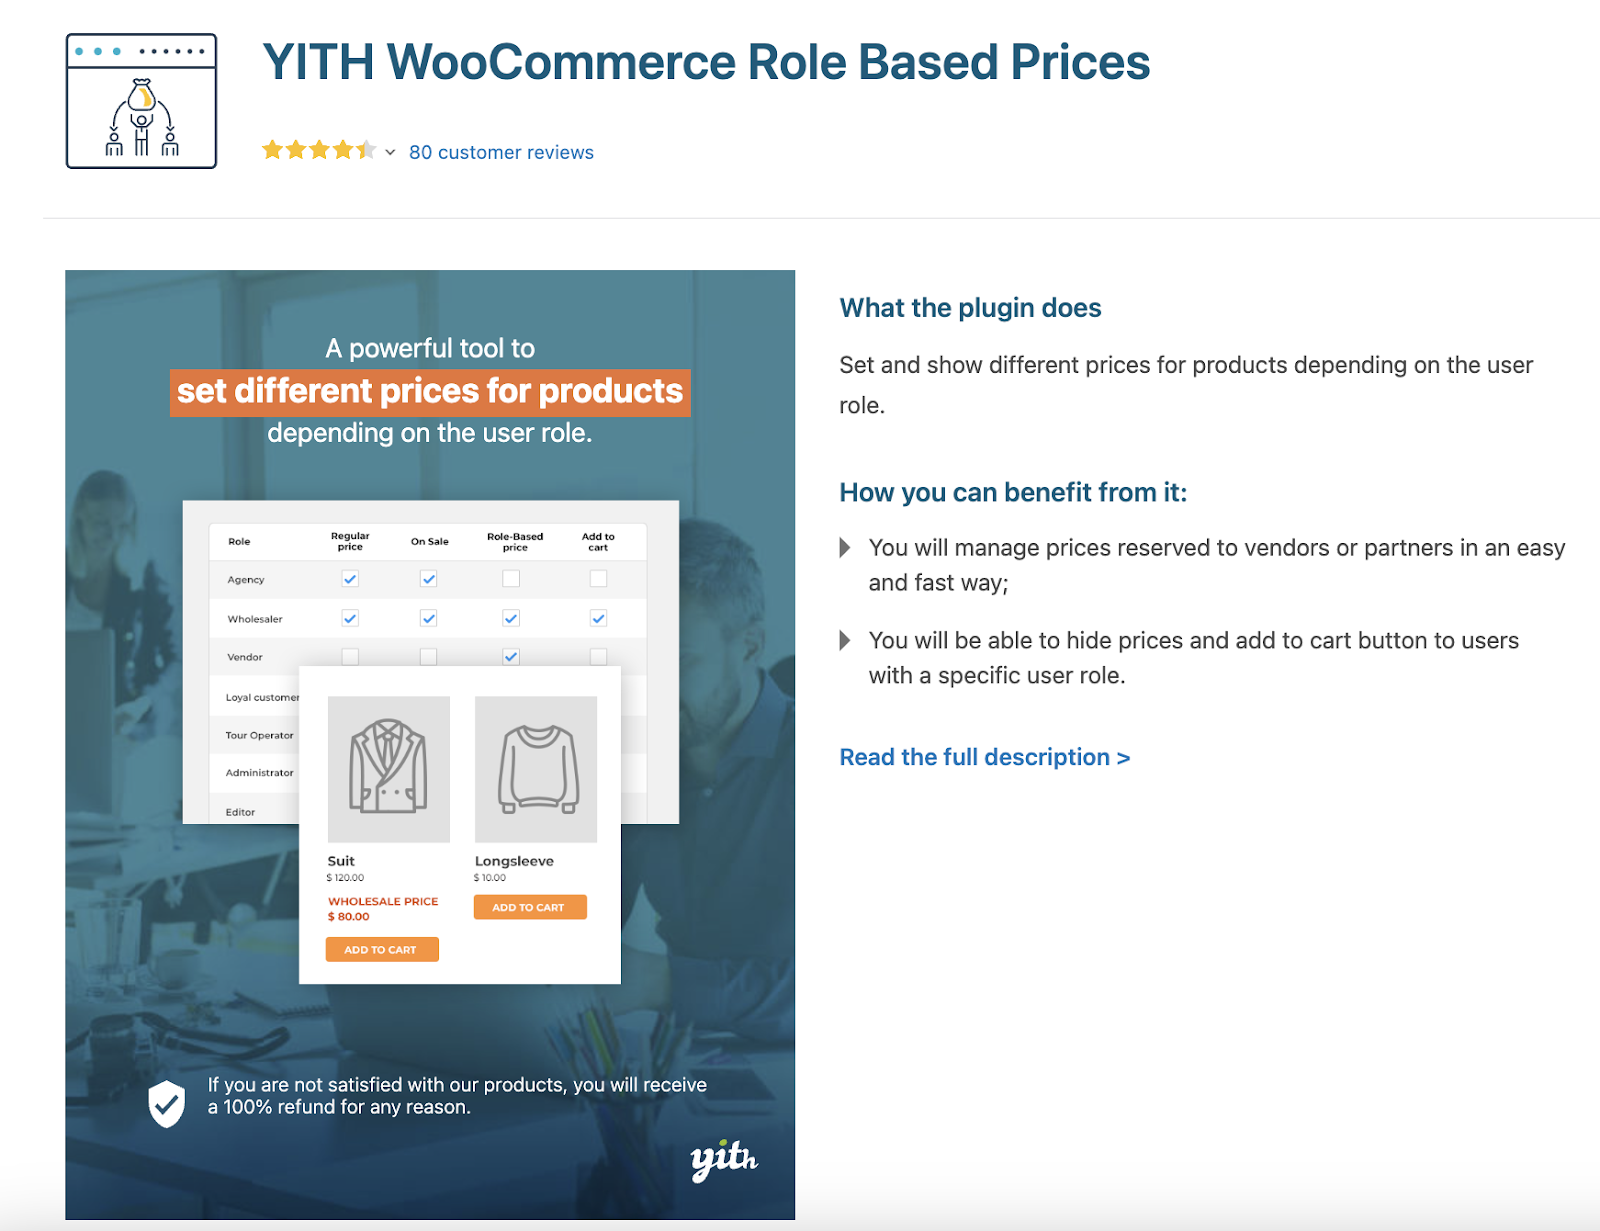 YITH WooCommerce Role Based Prices Plugin